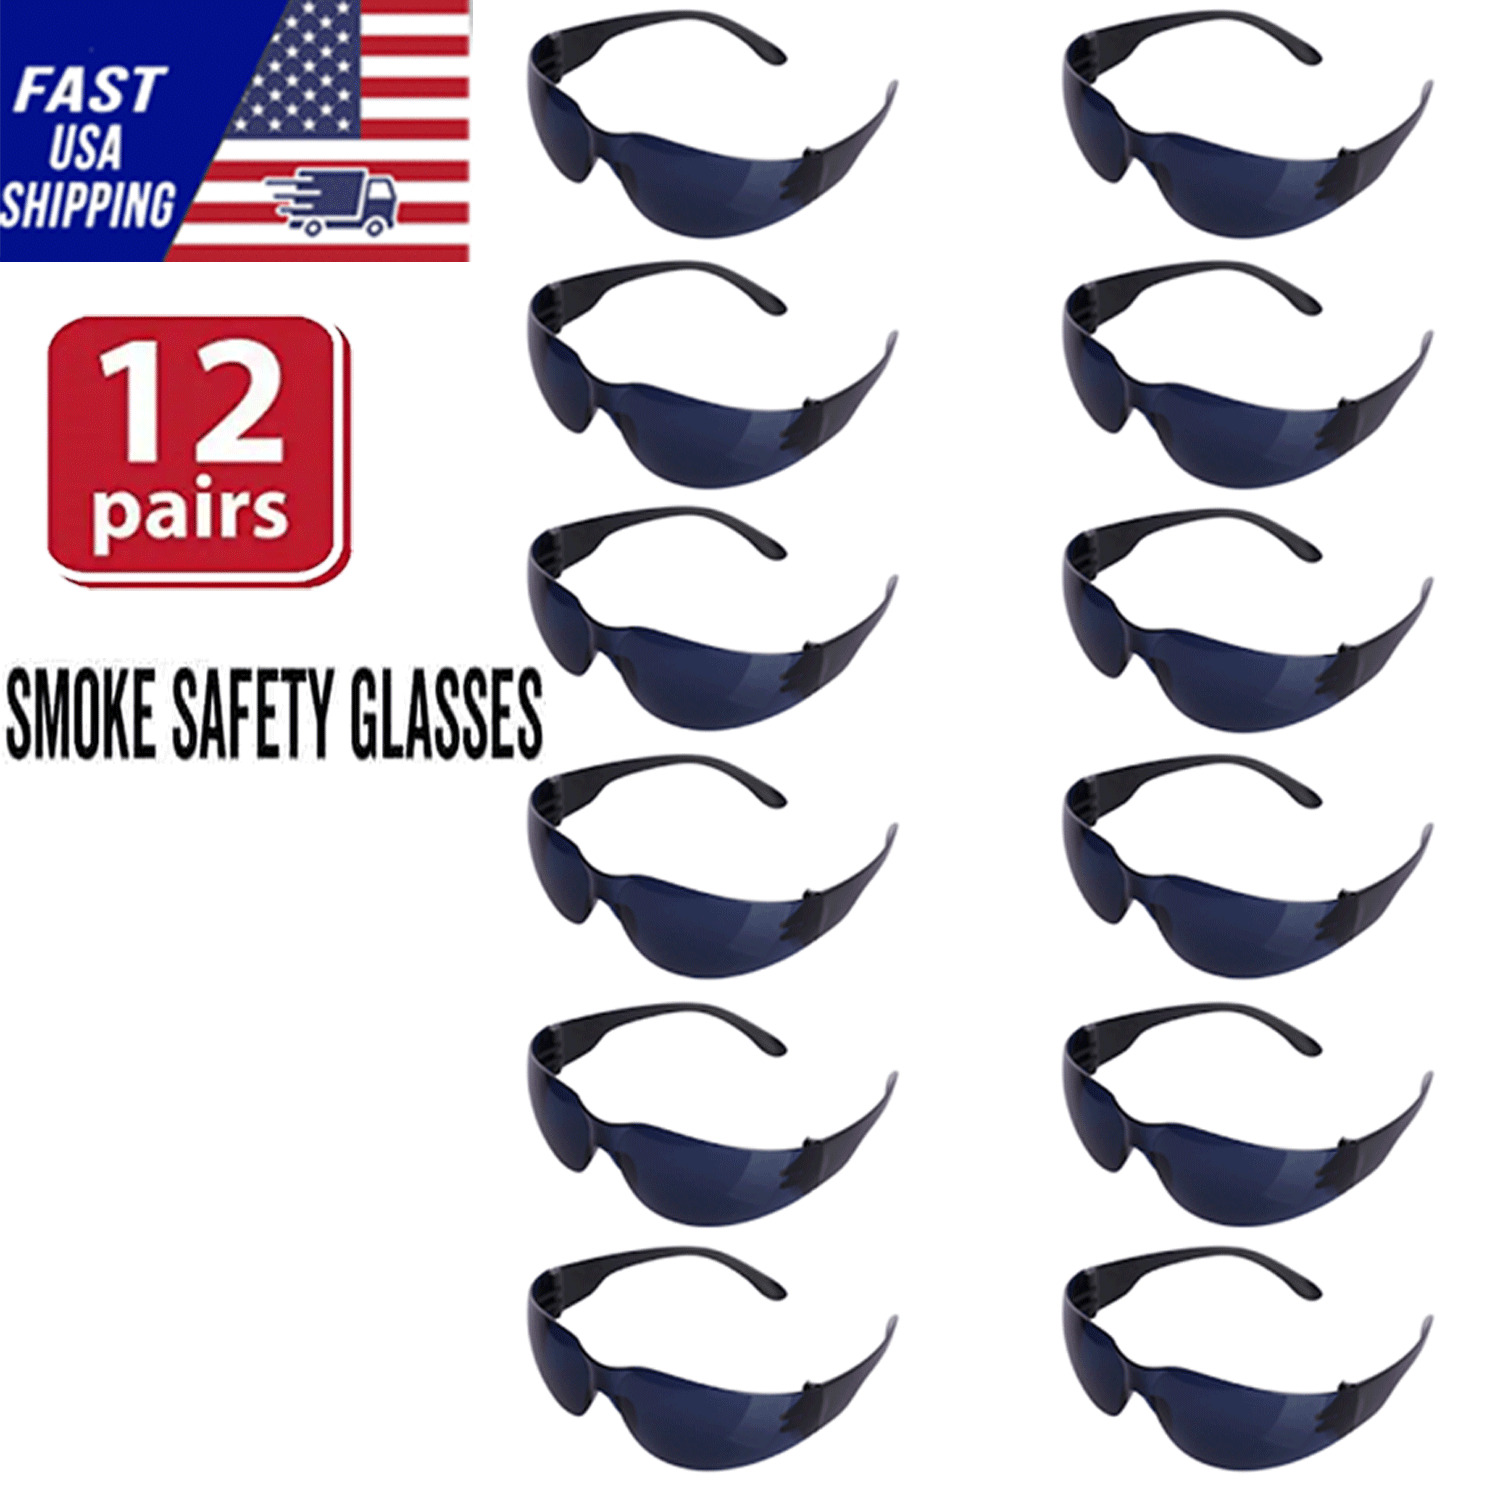 12 PAIR Pack Safety Glasses Protective Grey SMOKE Lens Sunglasses Work Lot Z87 